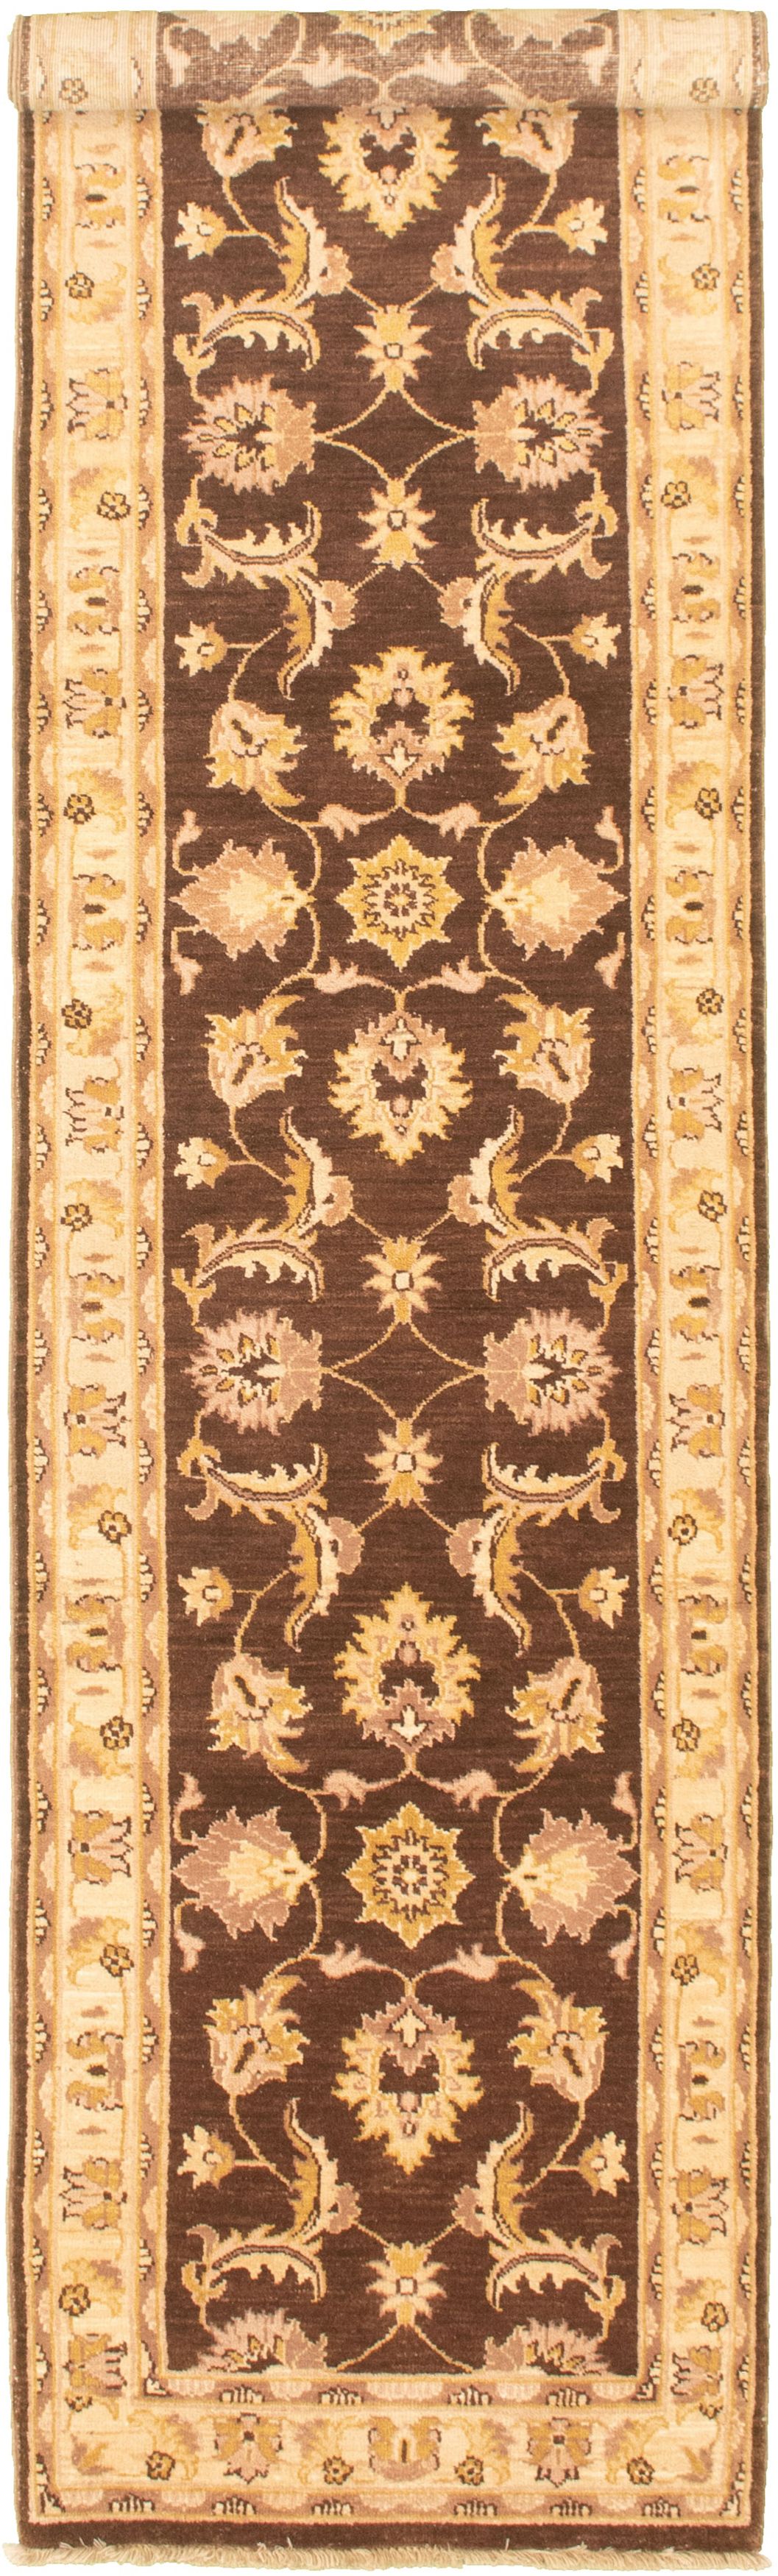 Hand-knotted Chobi Finest Brown Wool Rug 2'6" x 11'7" Size: 2'6" x 11'7"  